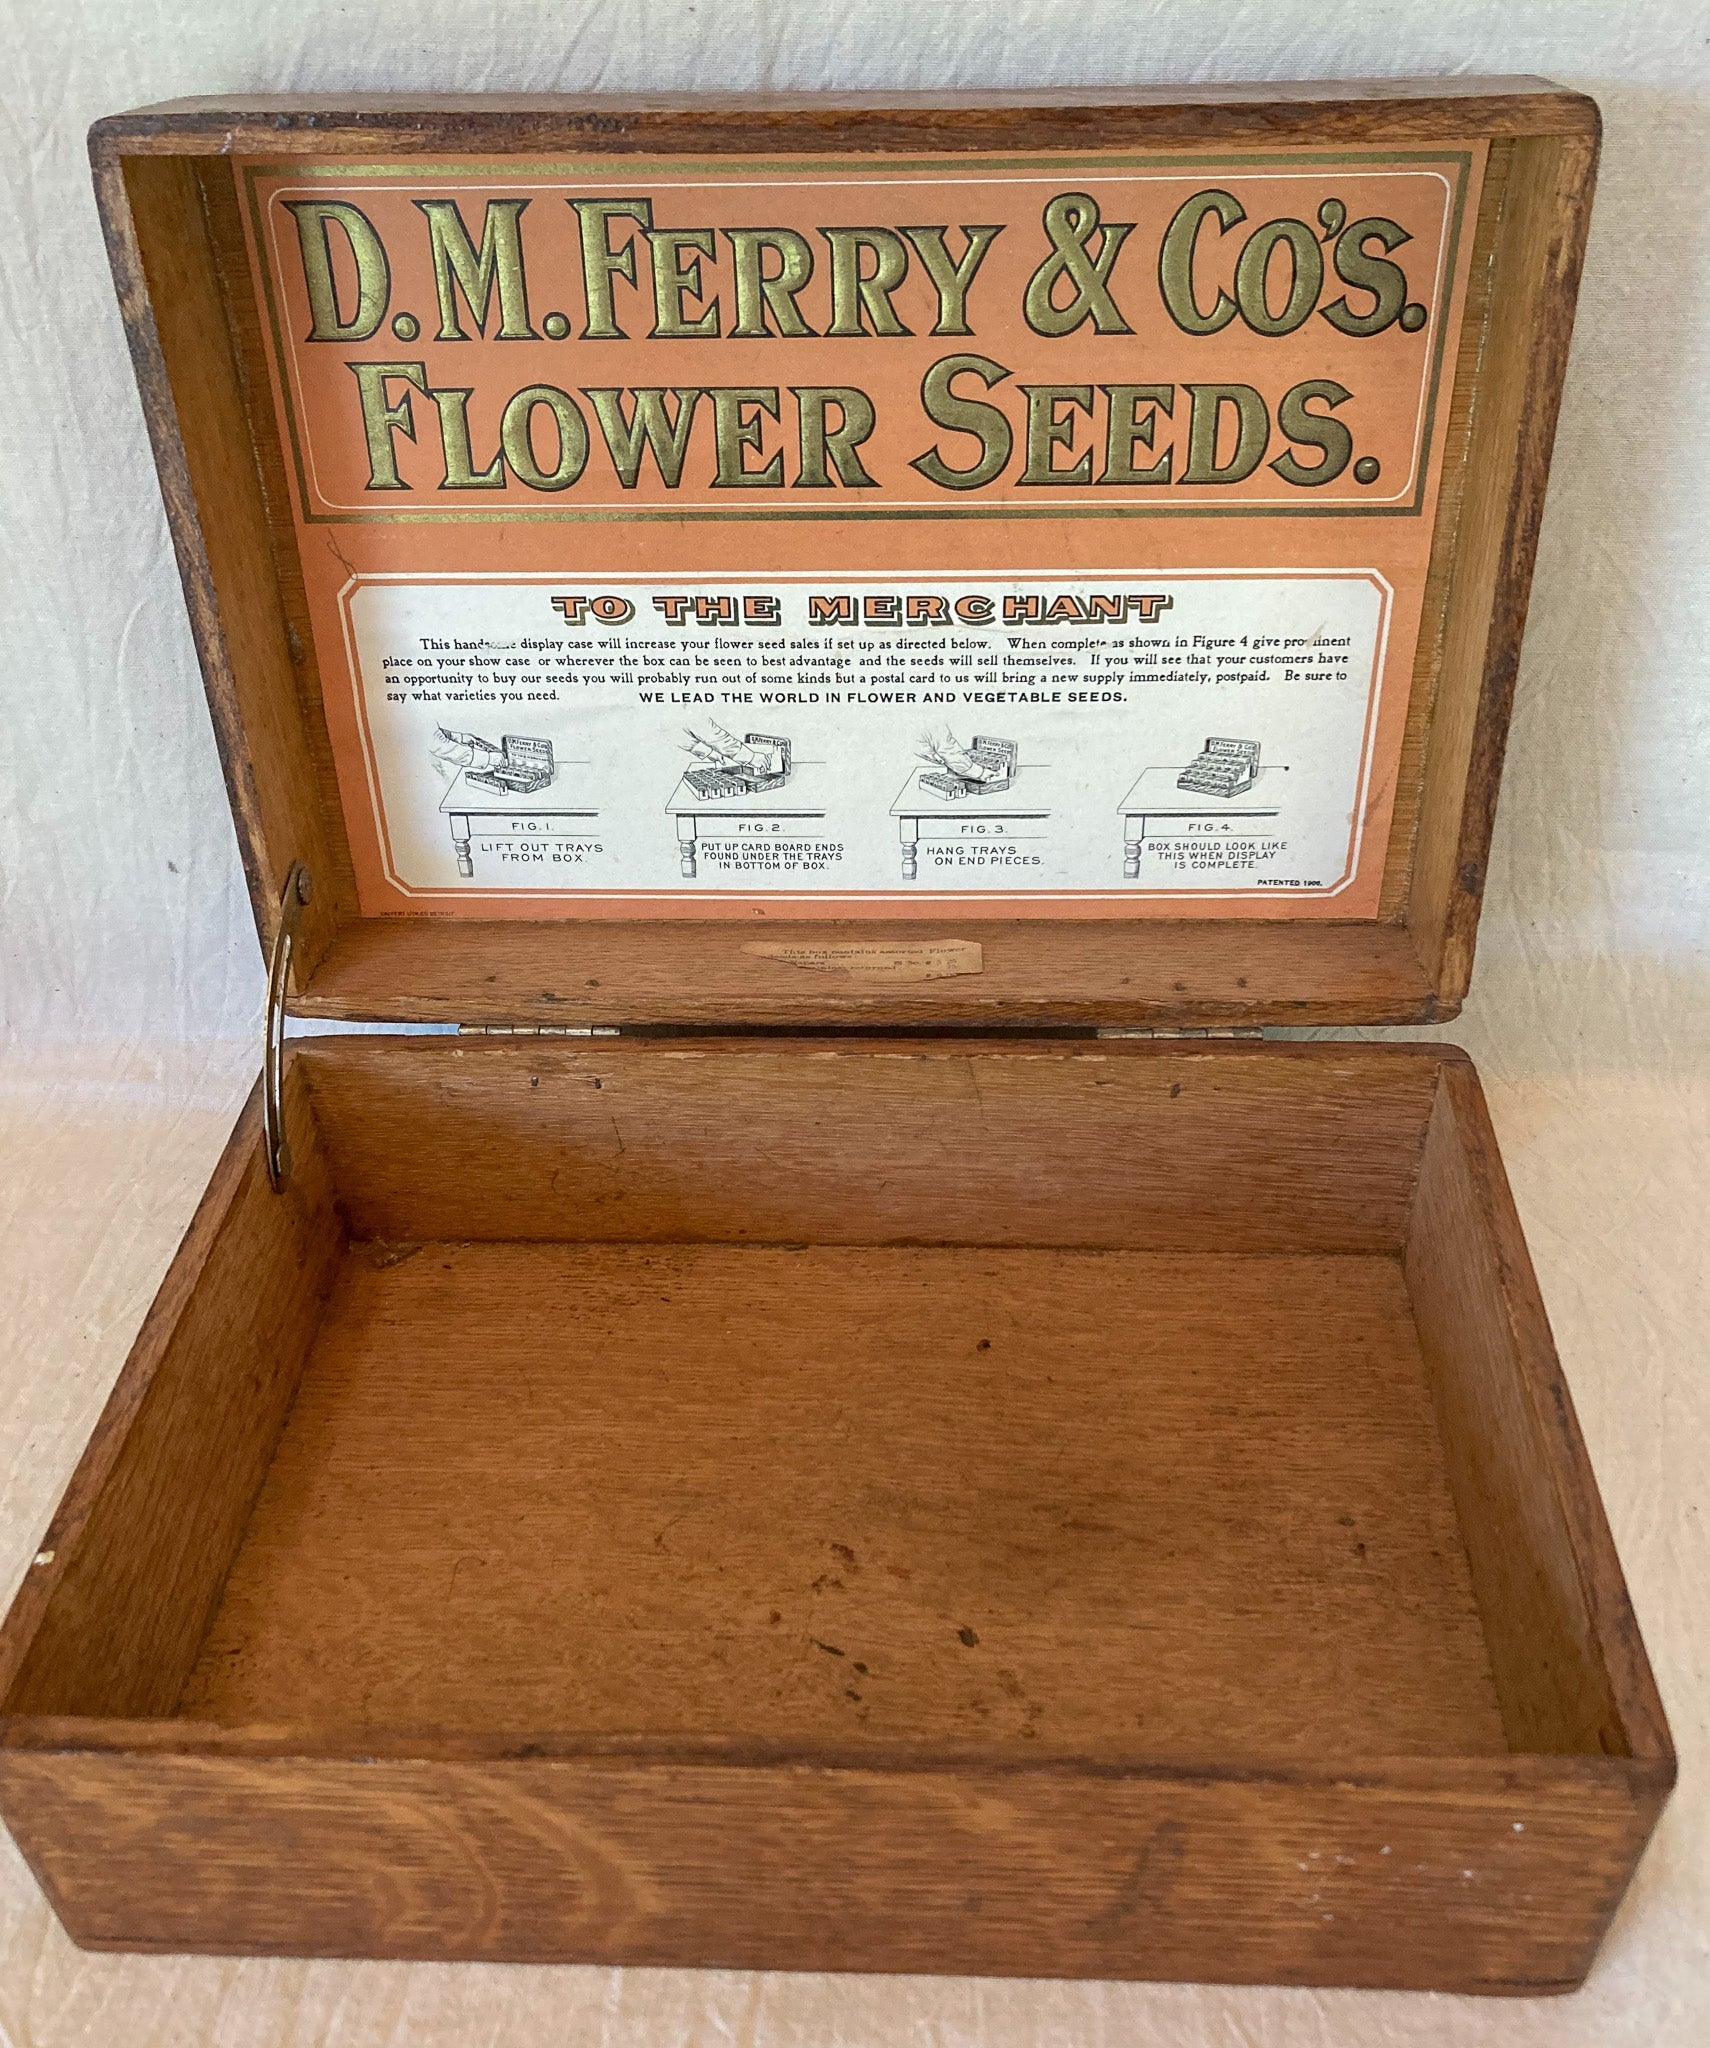 Early 1900’s Flower Seed Box, 1914 Choice Flower Seeds Catalog and 1927 Burpee’s Seed Catalog